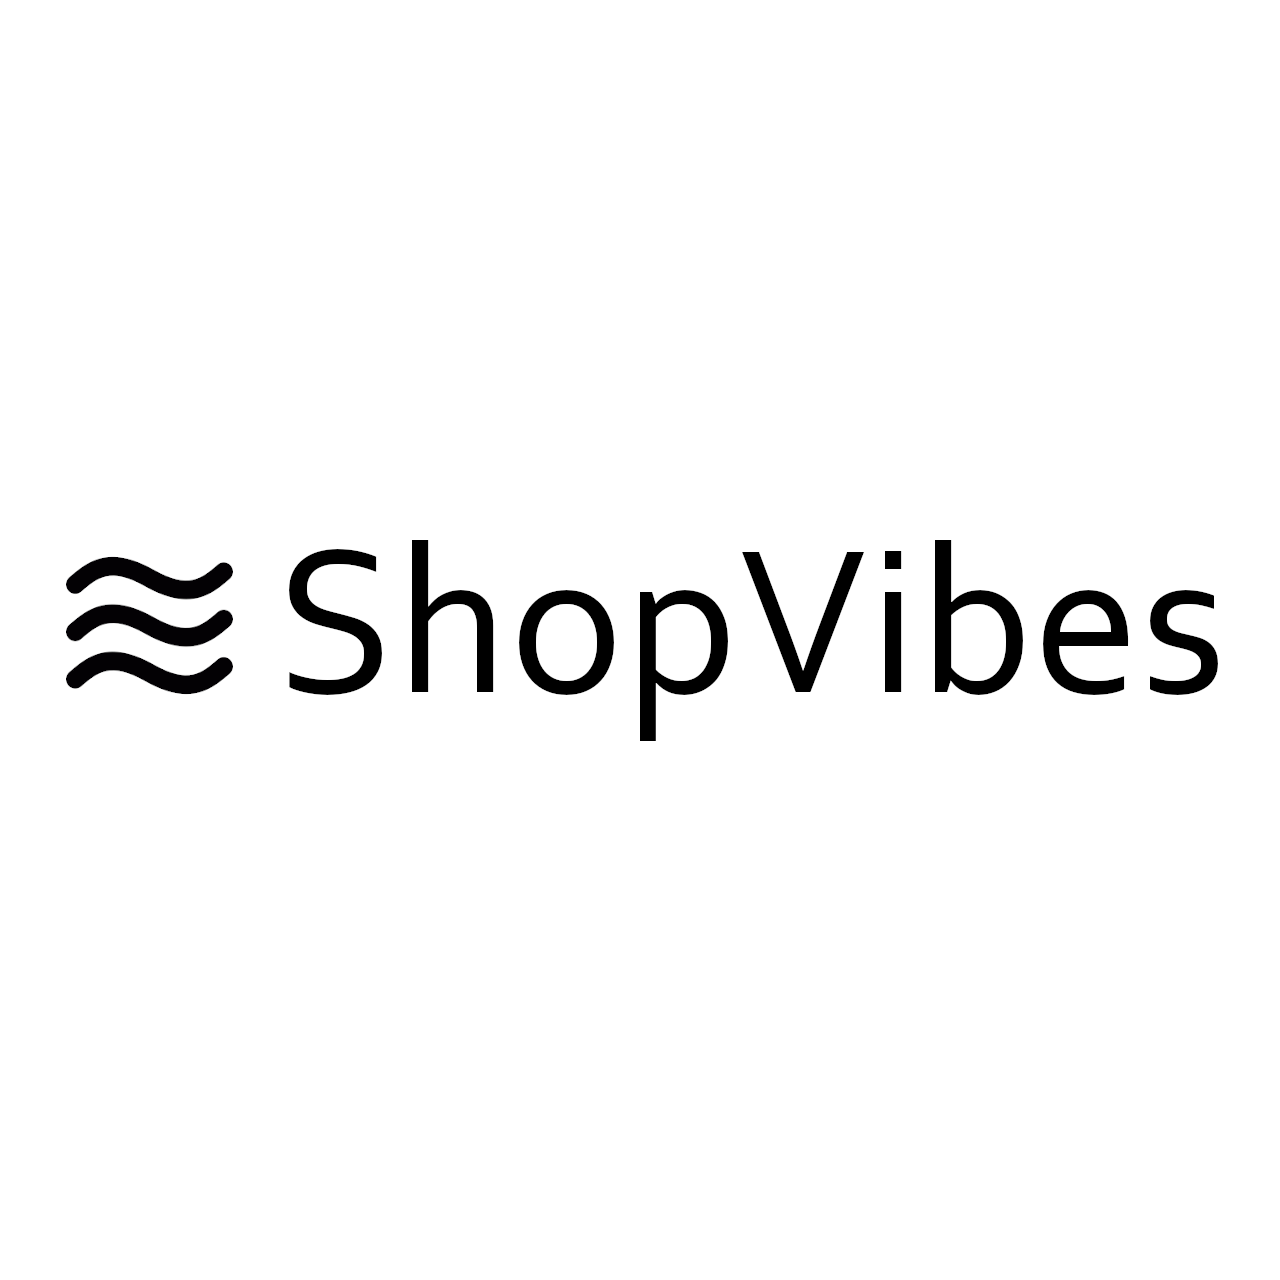 ShopVibes / startup from München / Background